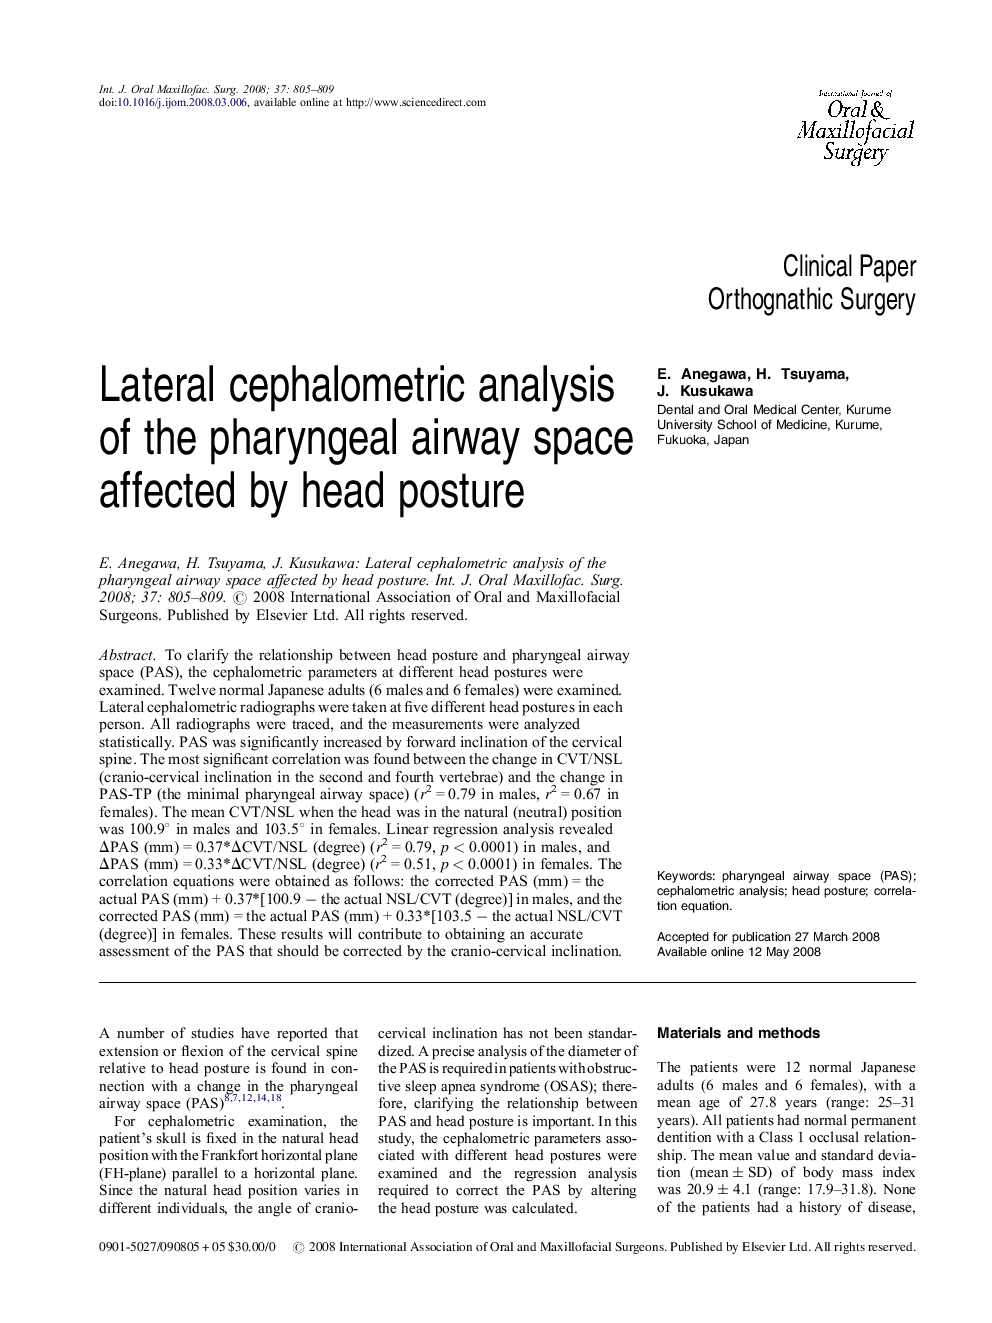 Lateral cephalometric analysis of the pharyngeal airway space affected by head posture